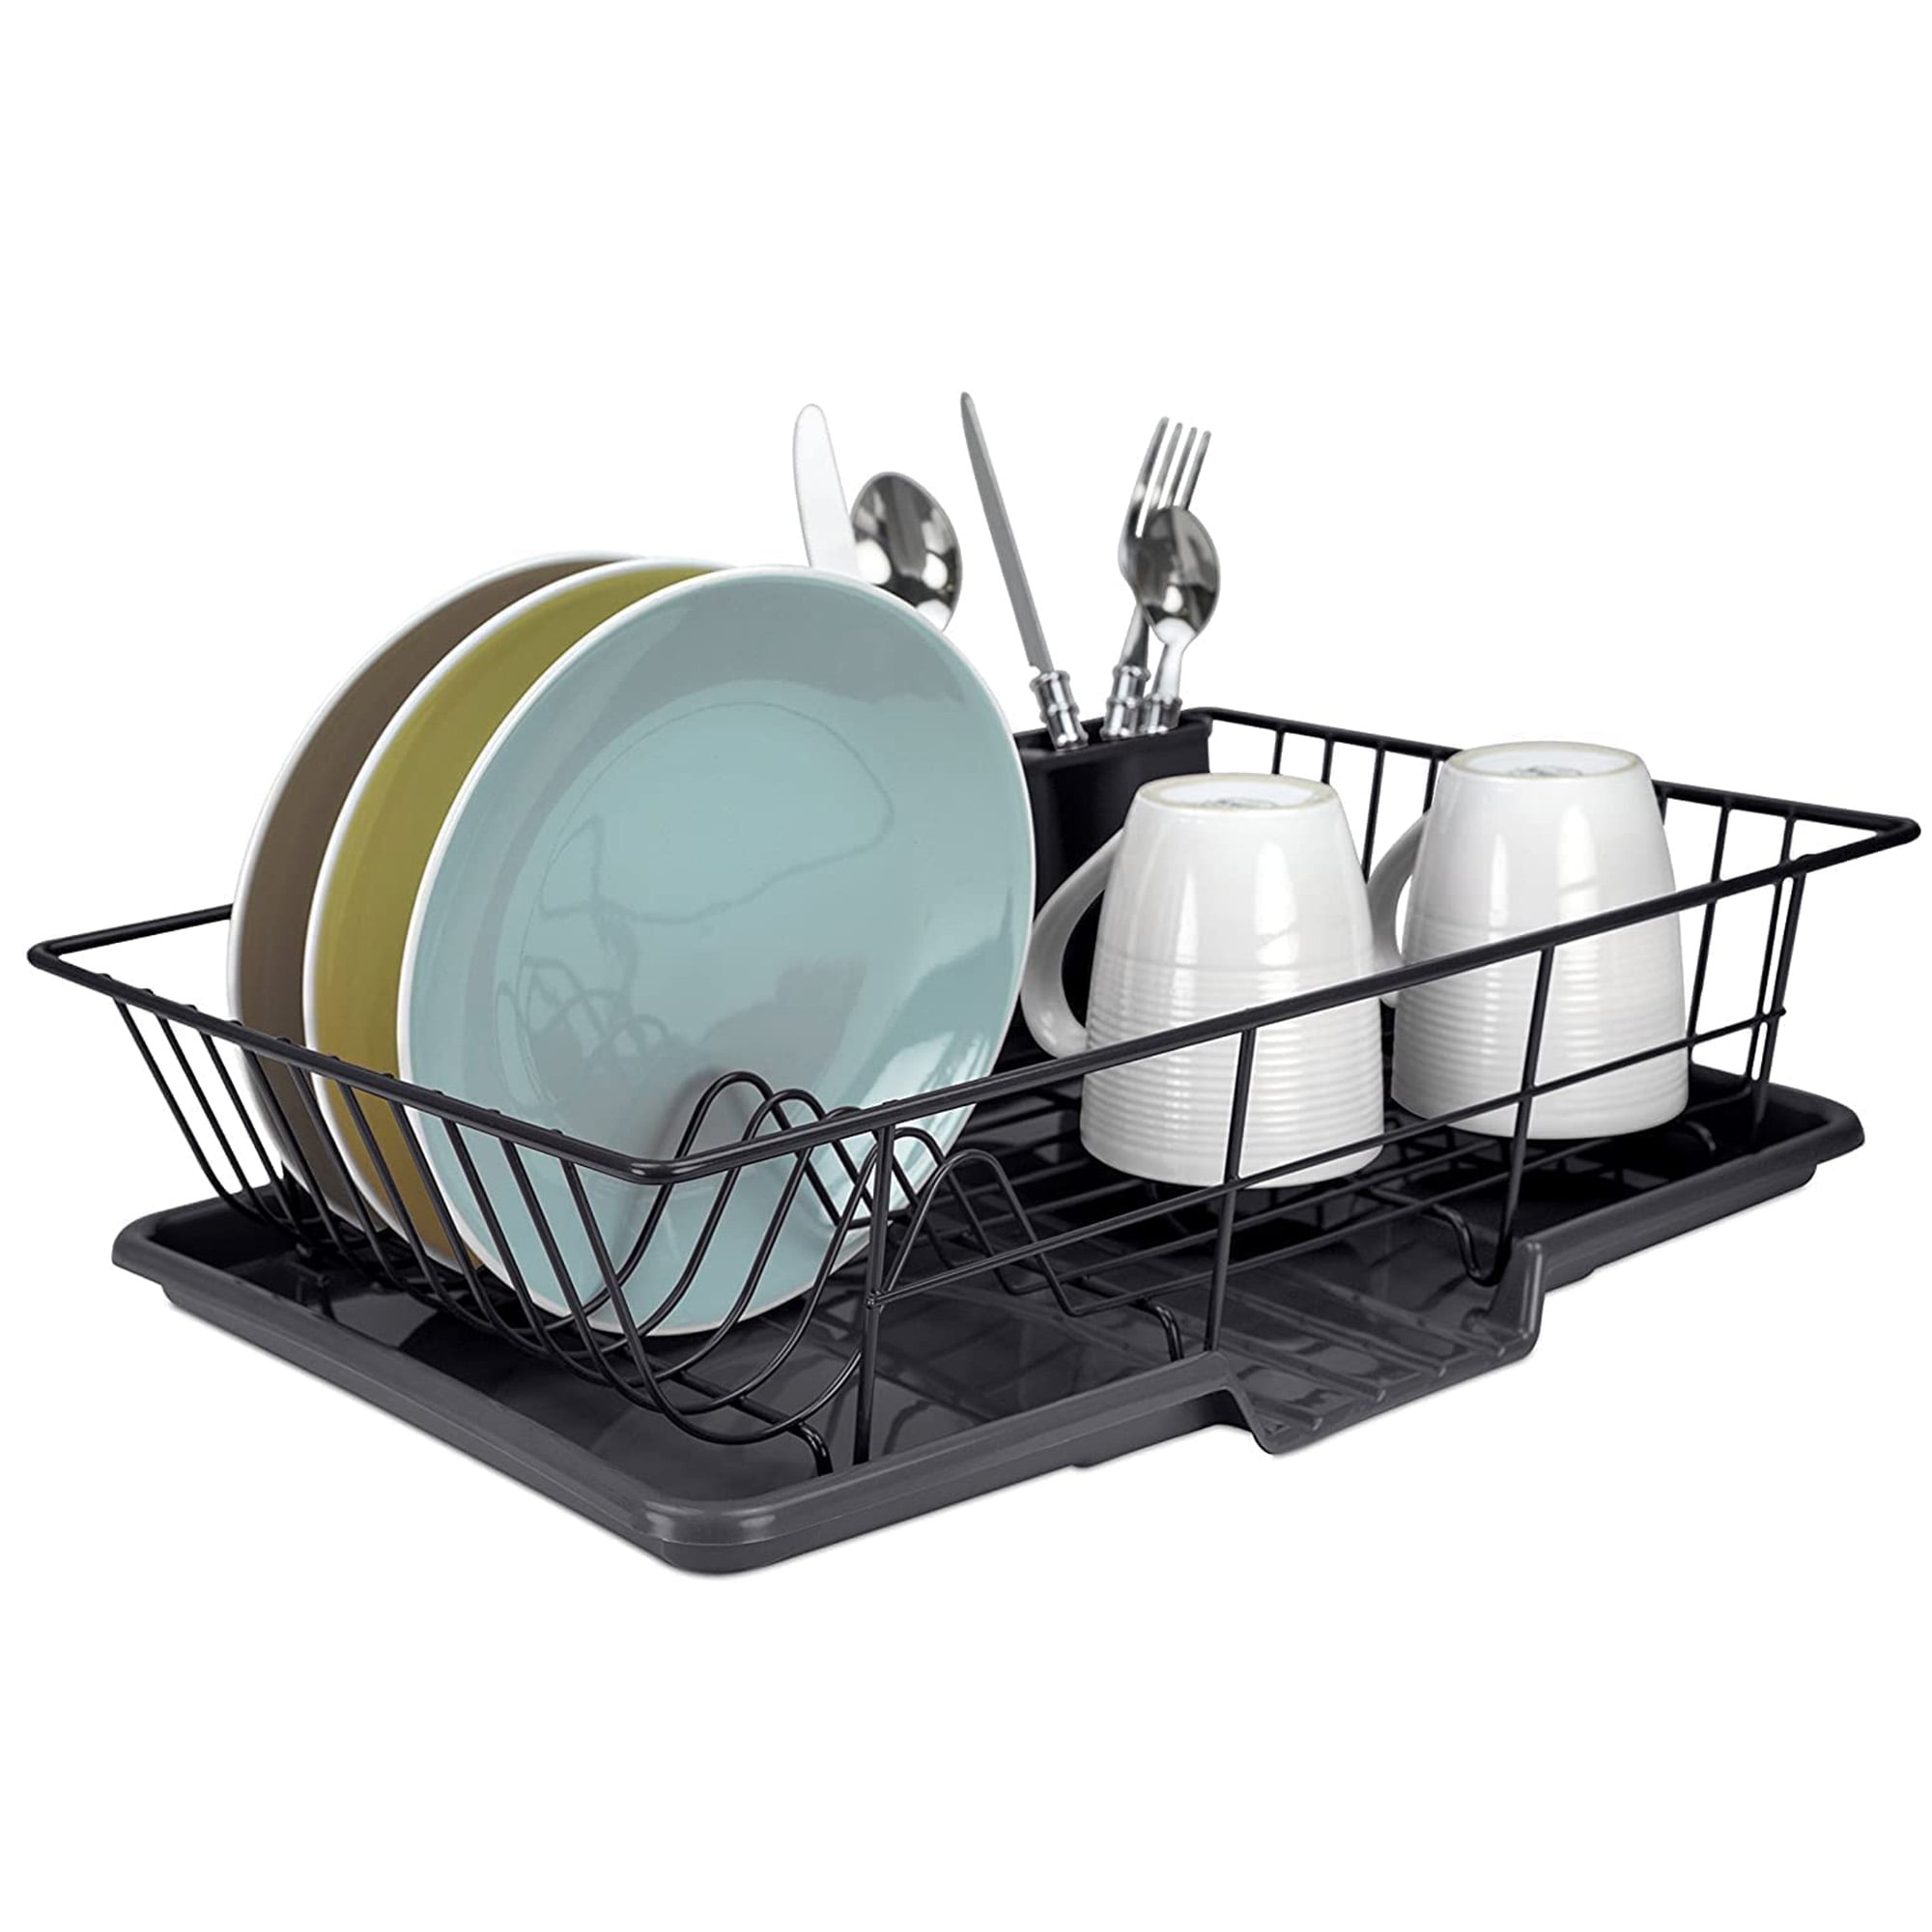 OITREX 3 in 1 Combo Offer Large Sink Set Dish Rack Drainer with Tray for  Kitchen